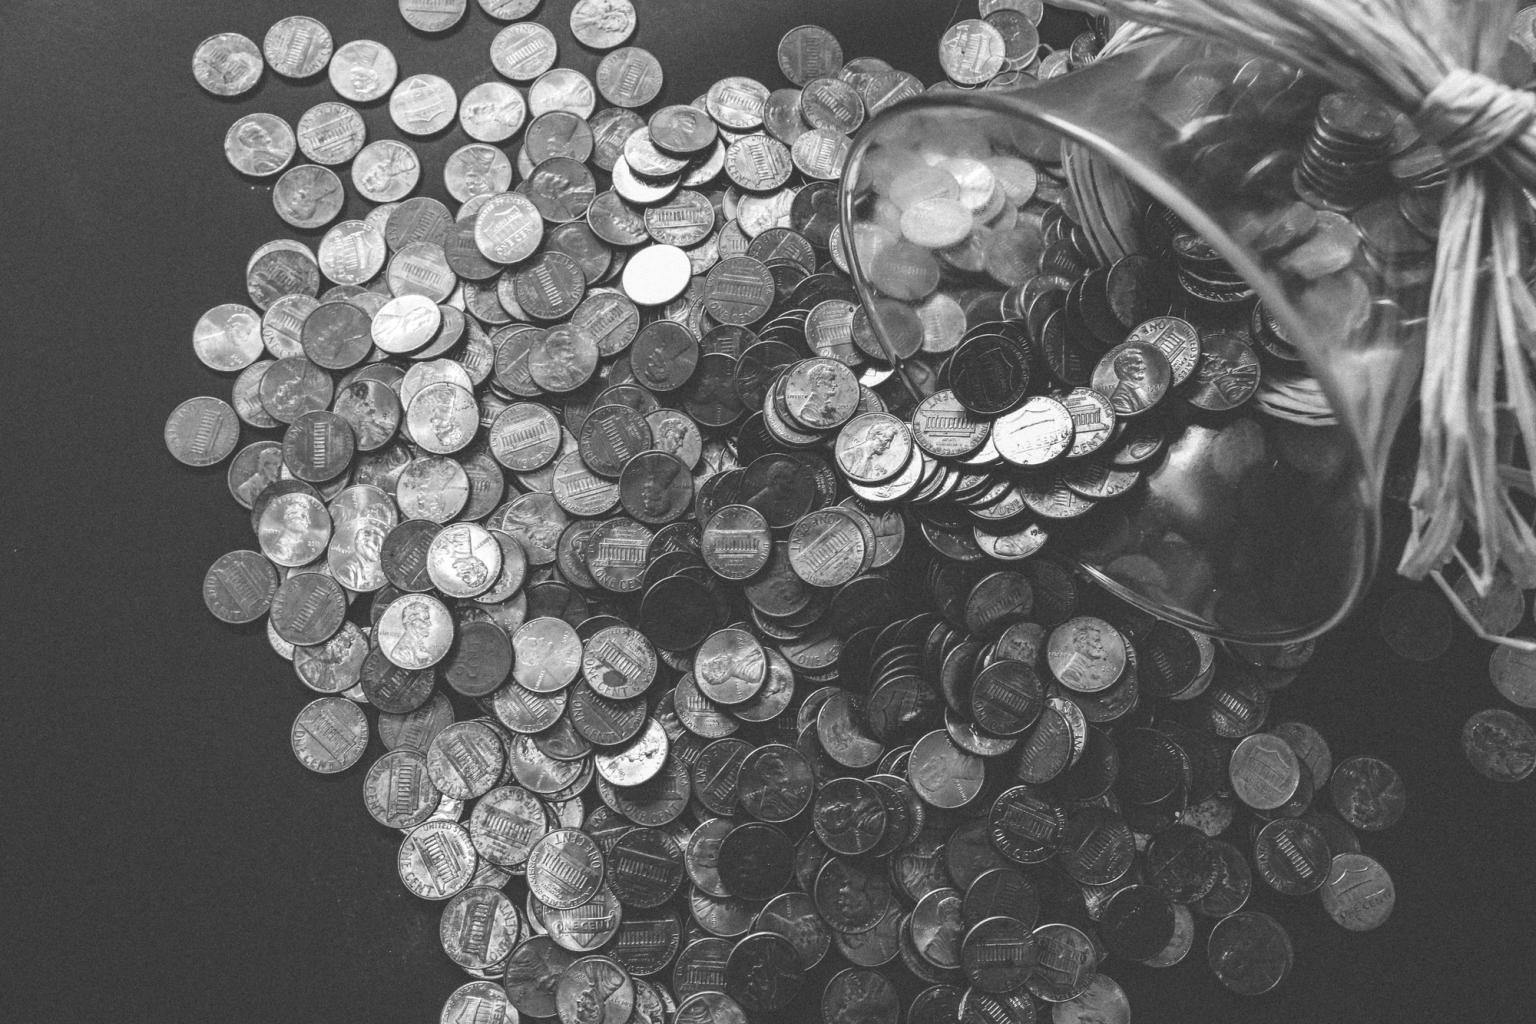 A black and white image of a pile of coins spilled from a glass vessel.